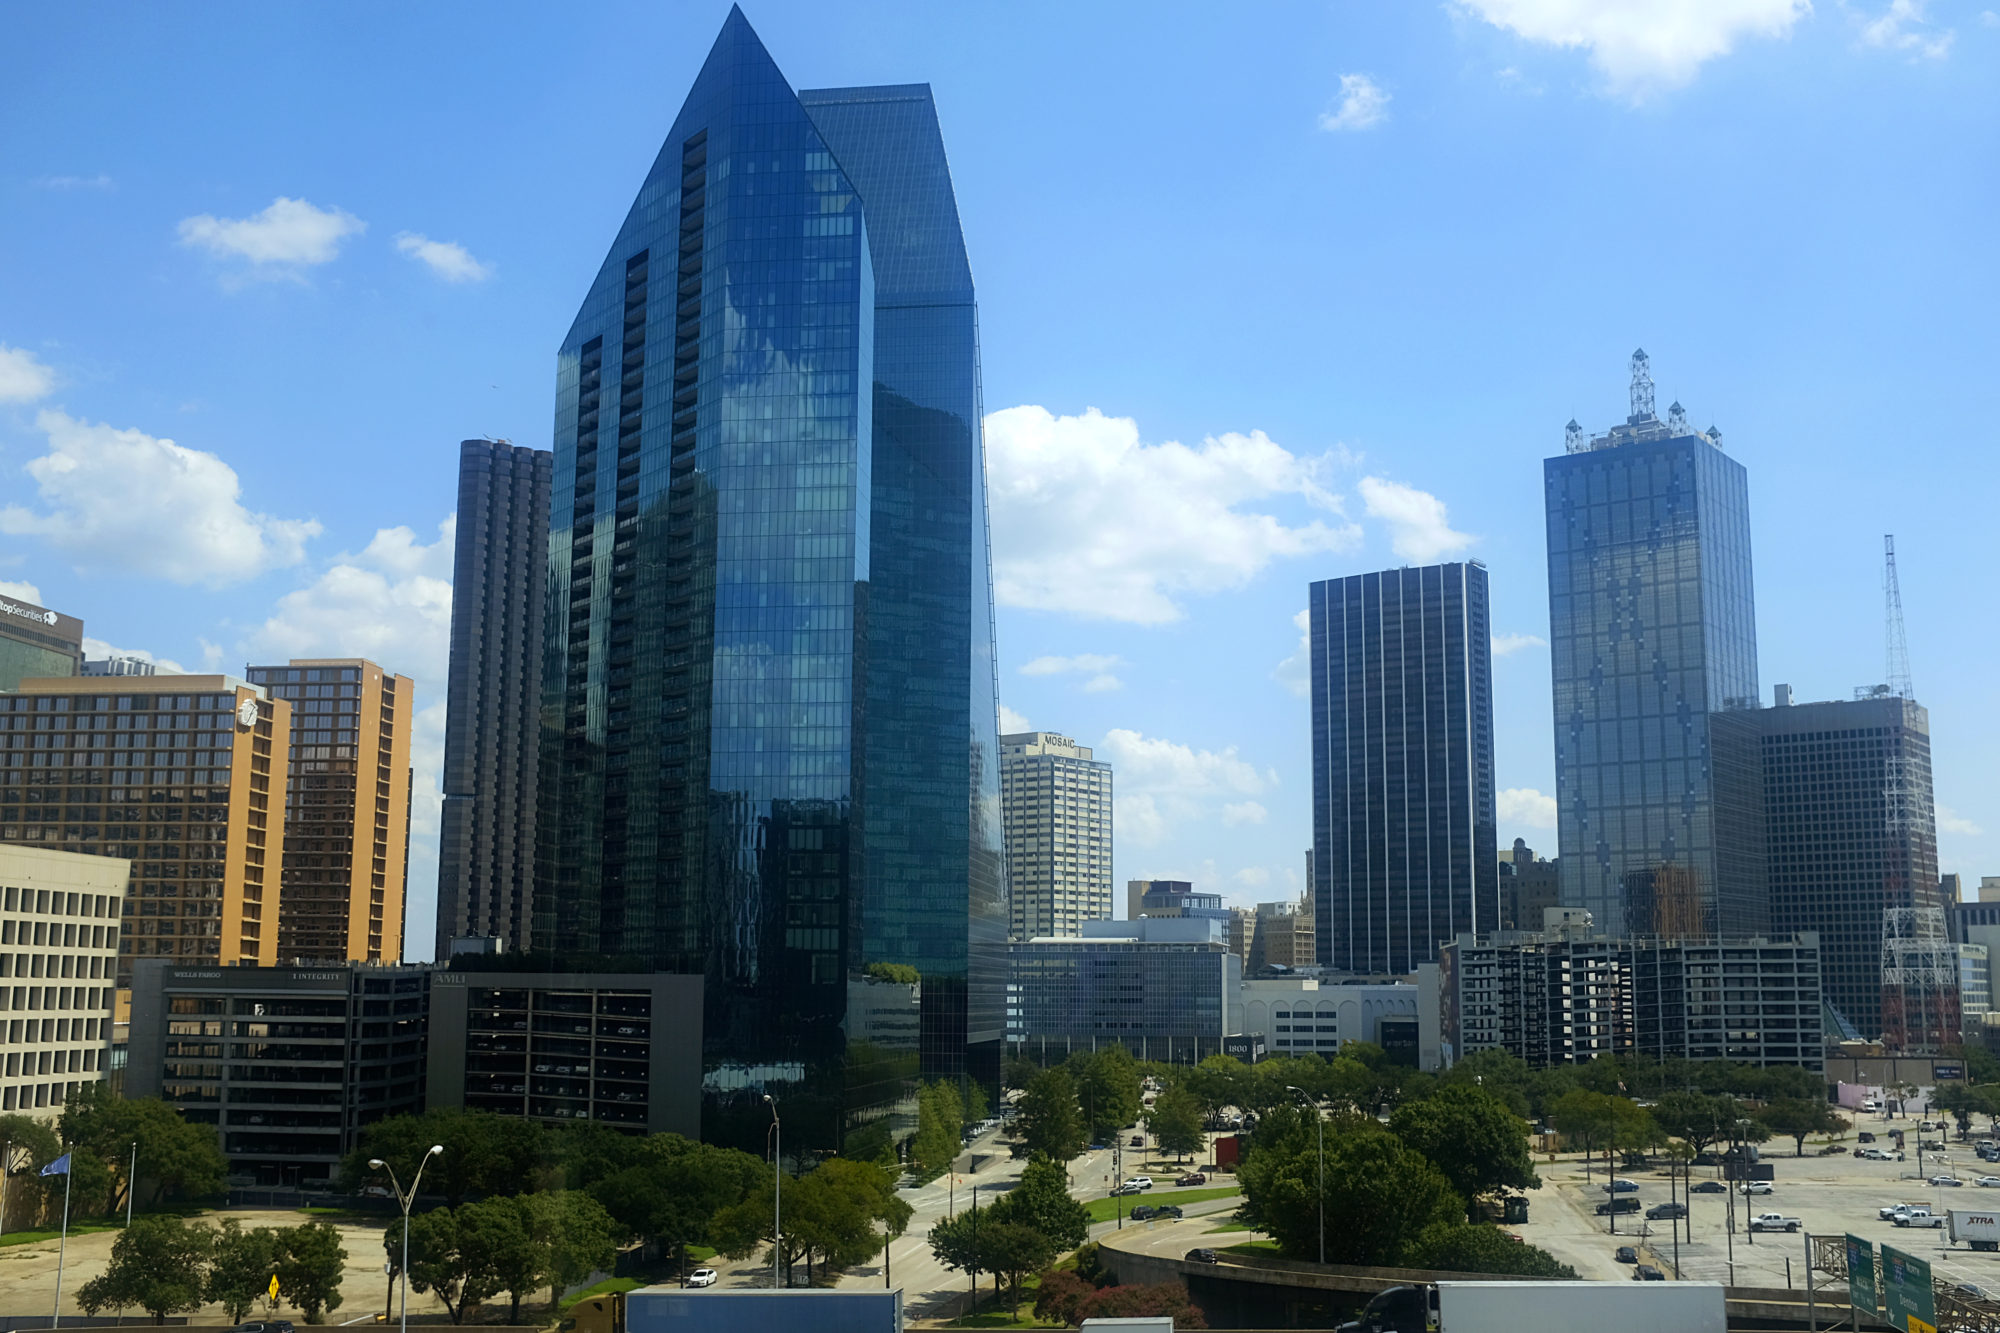 What you should know for your first visit to Dallas, Texas